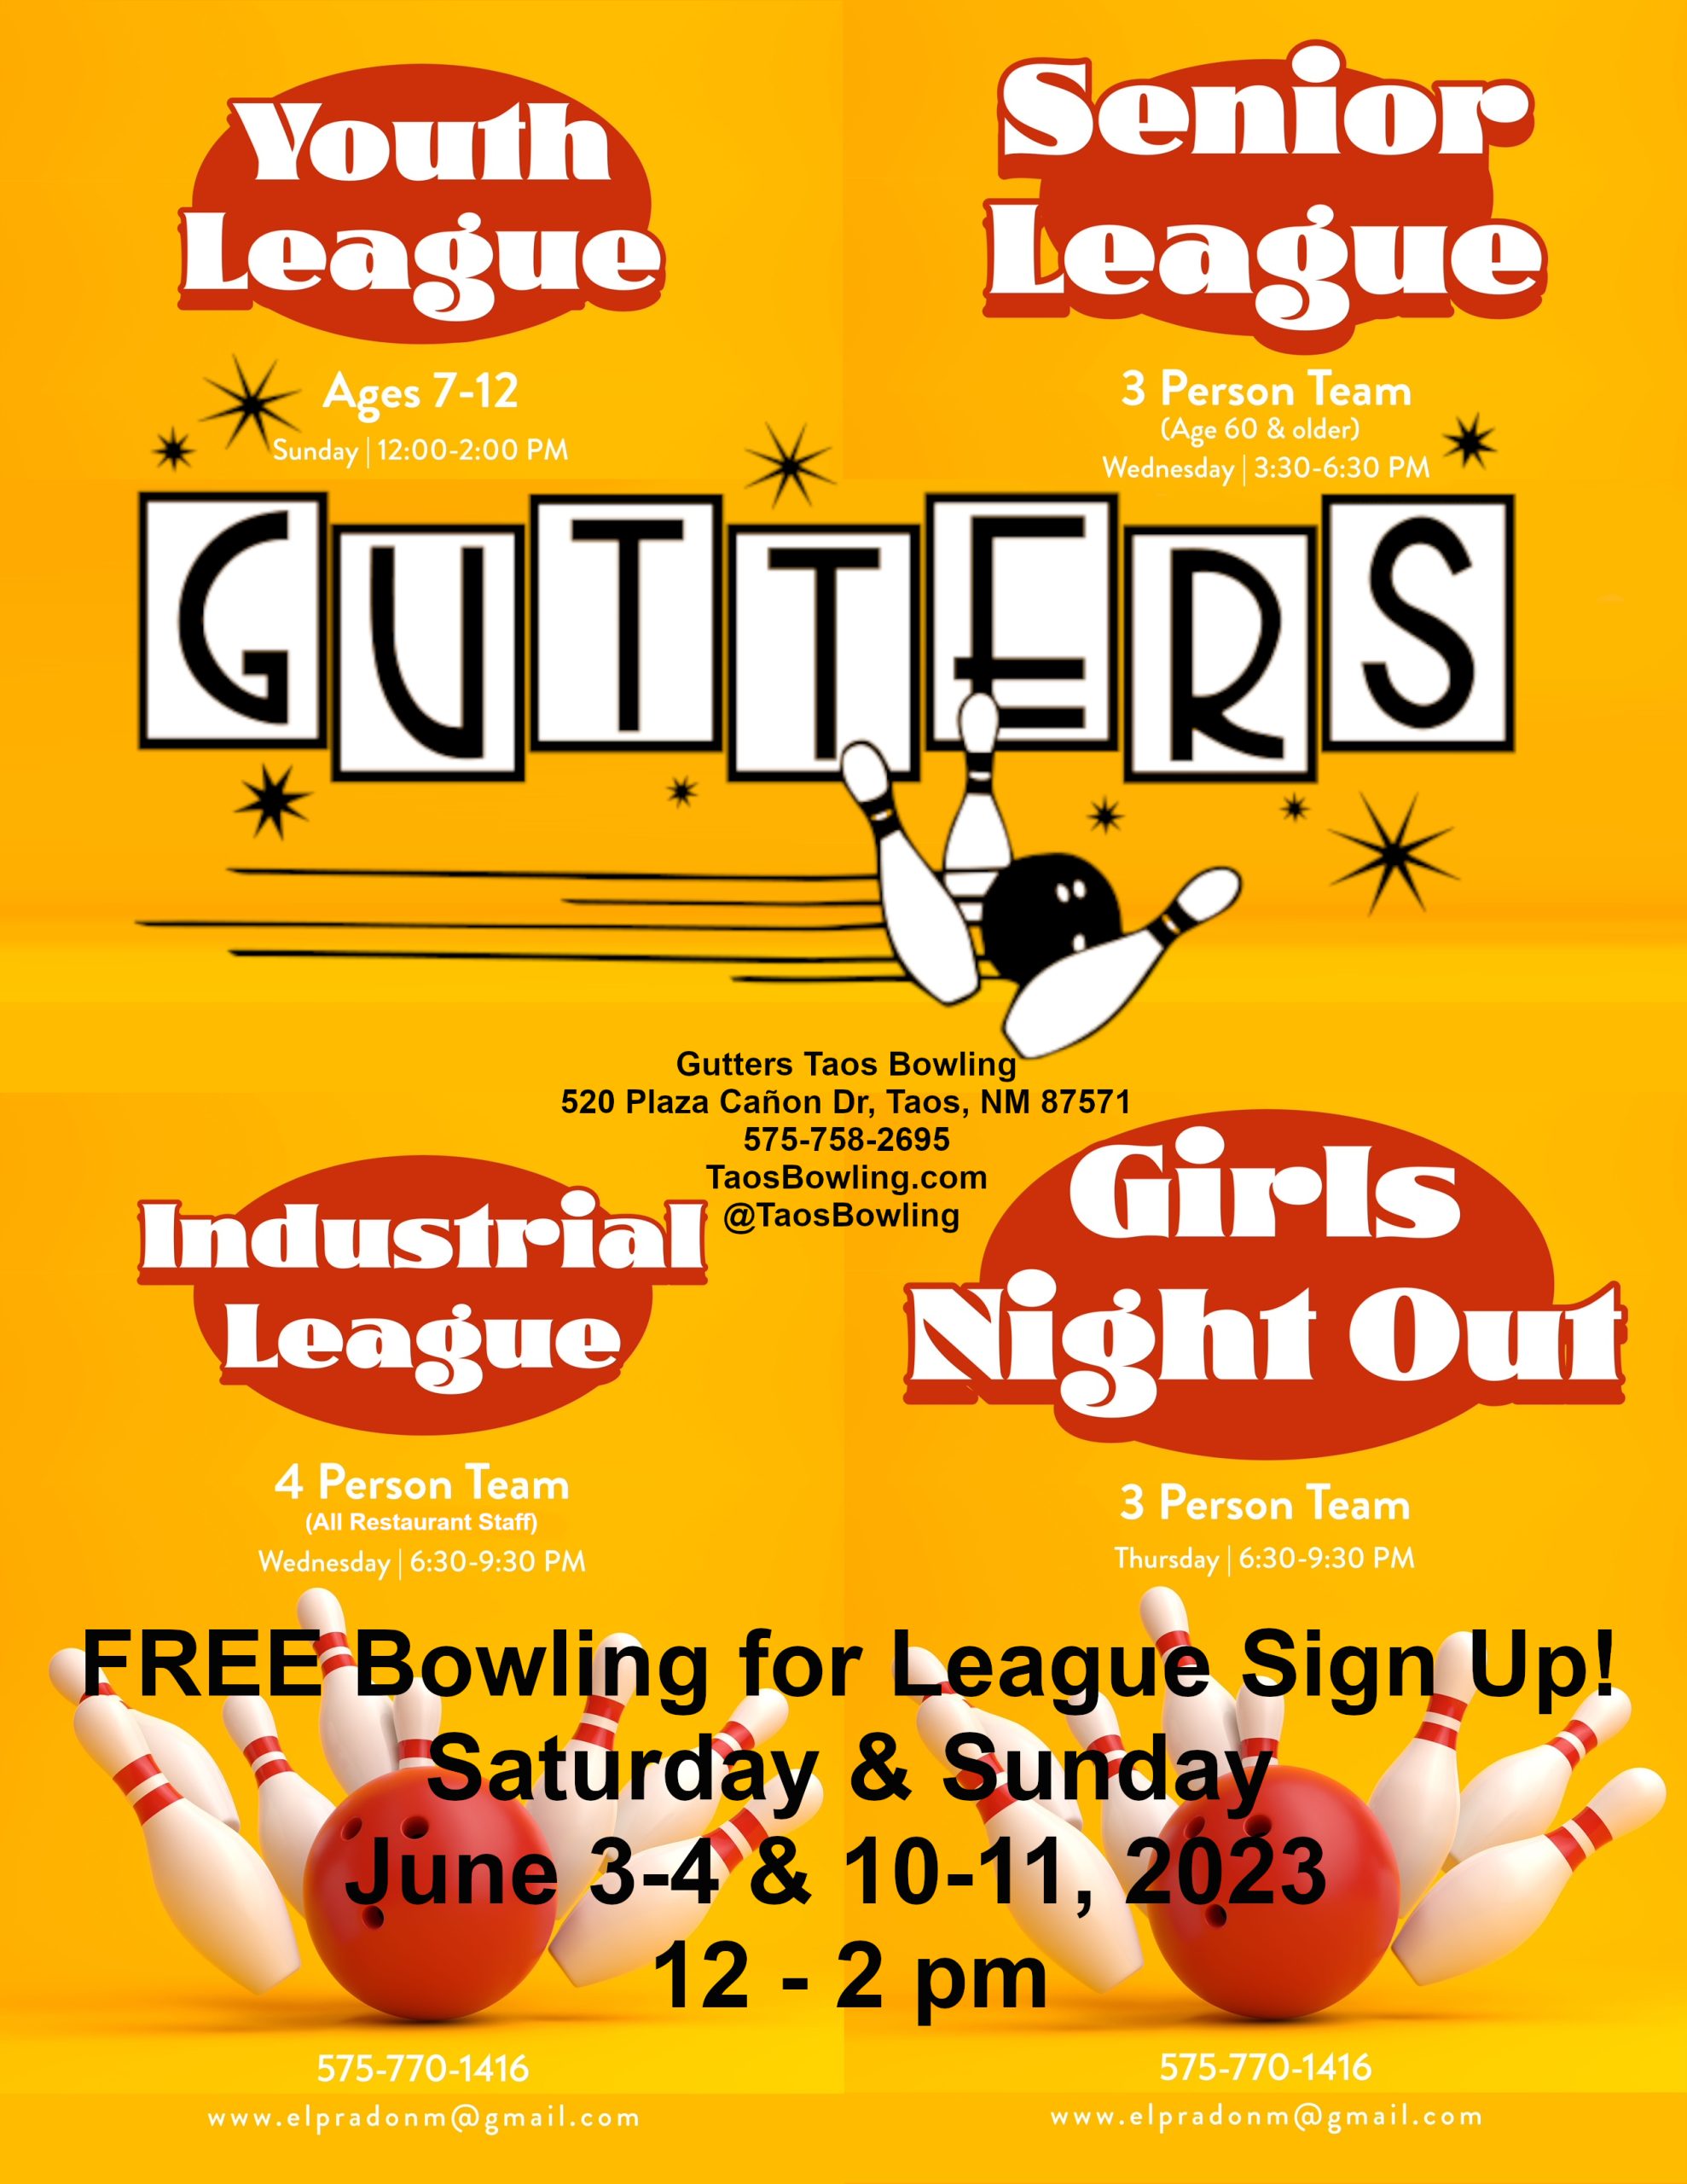 Taos Bowling INDUSTRY League